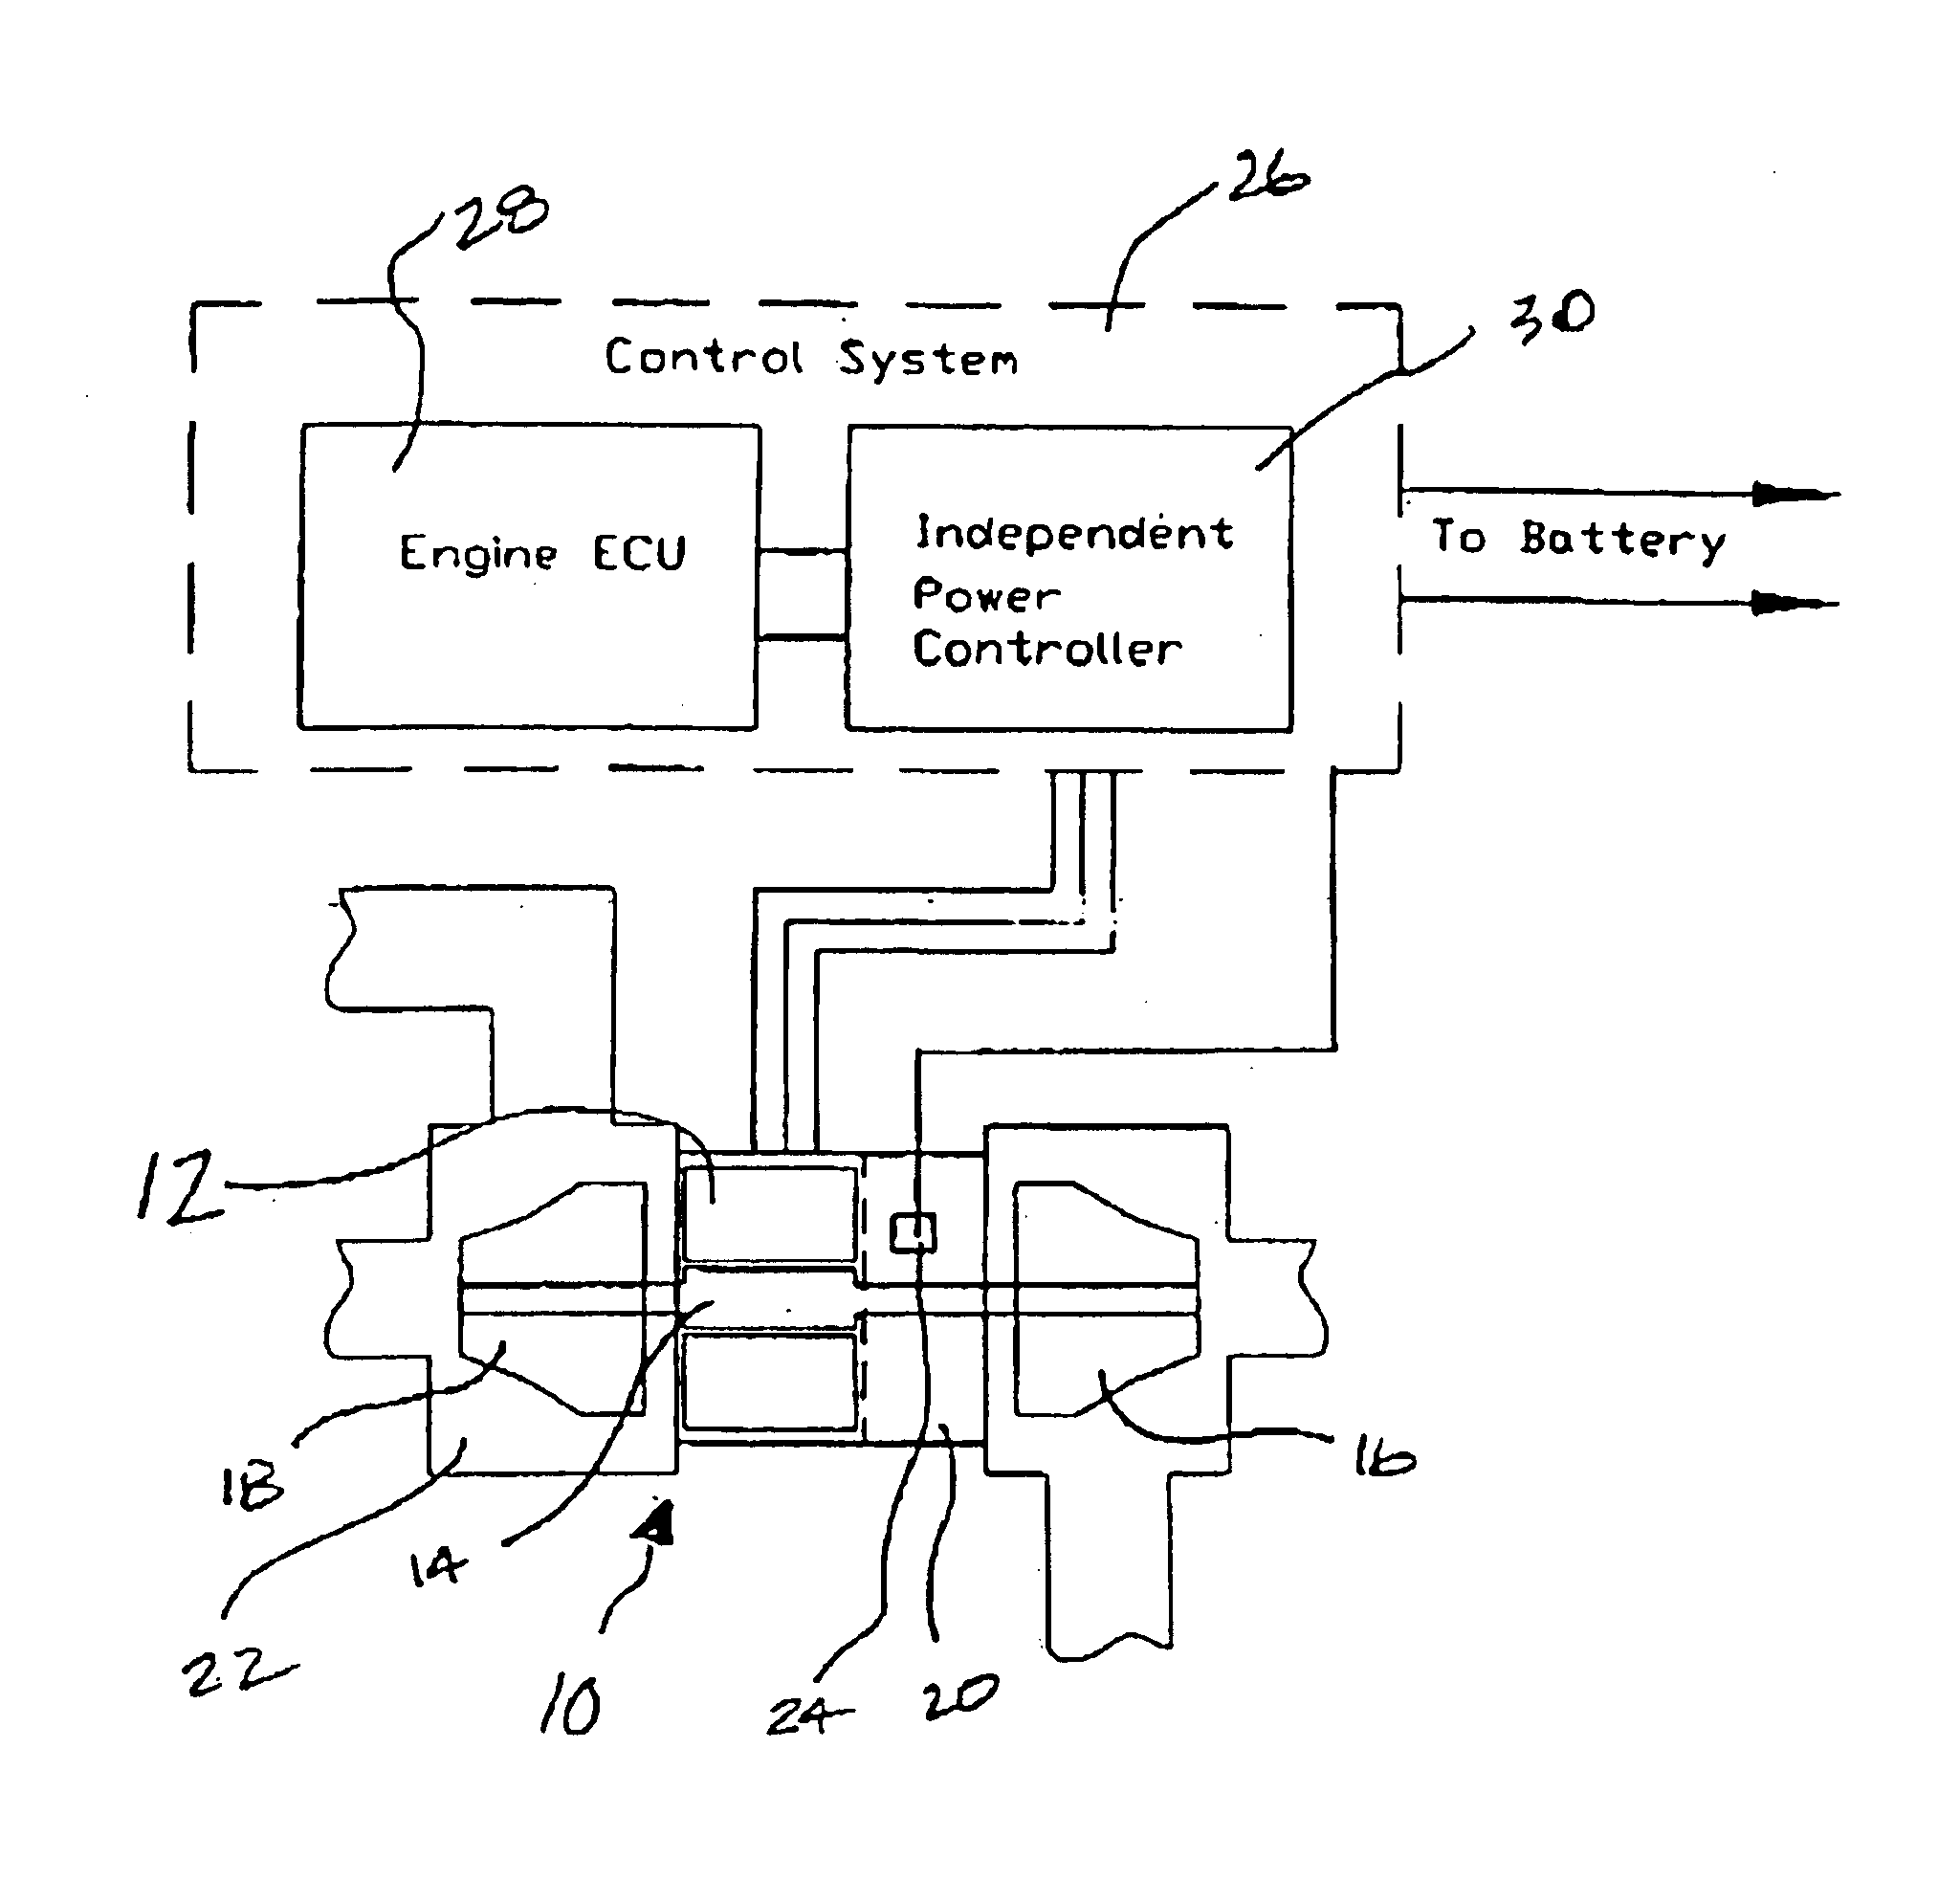 Oil pressure detector for electric assisted turbocharger